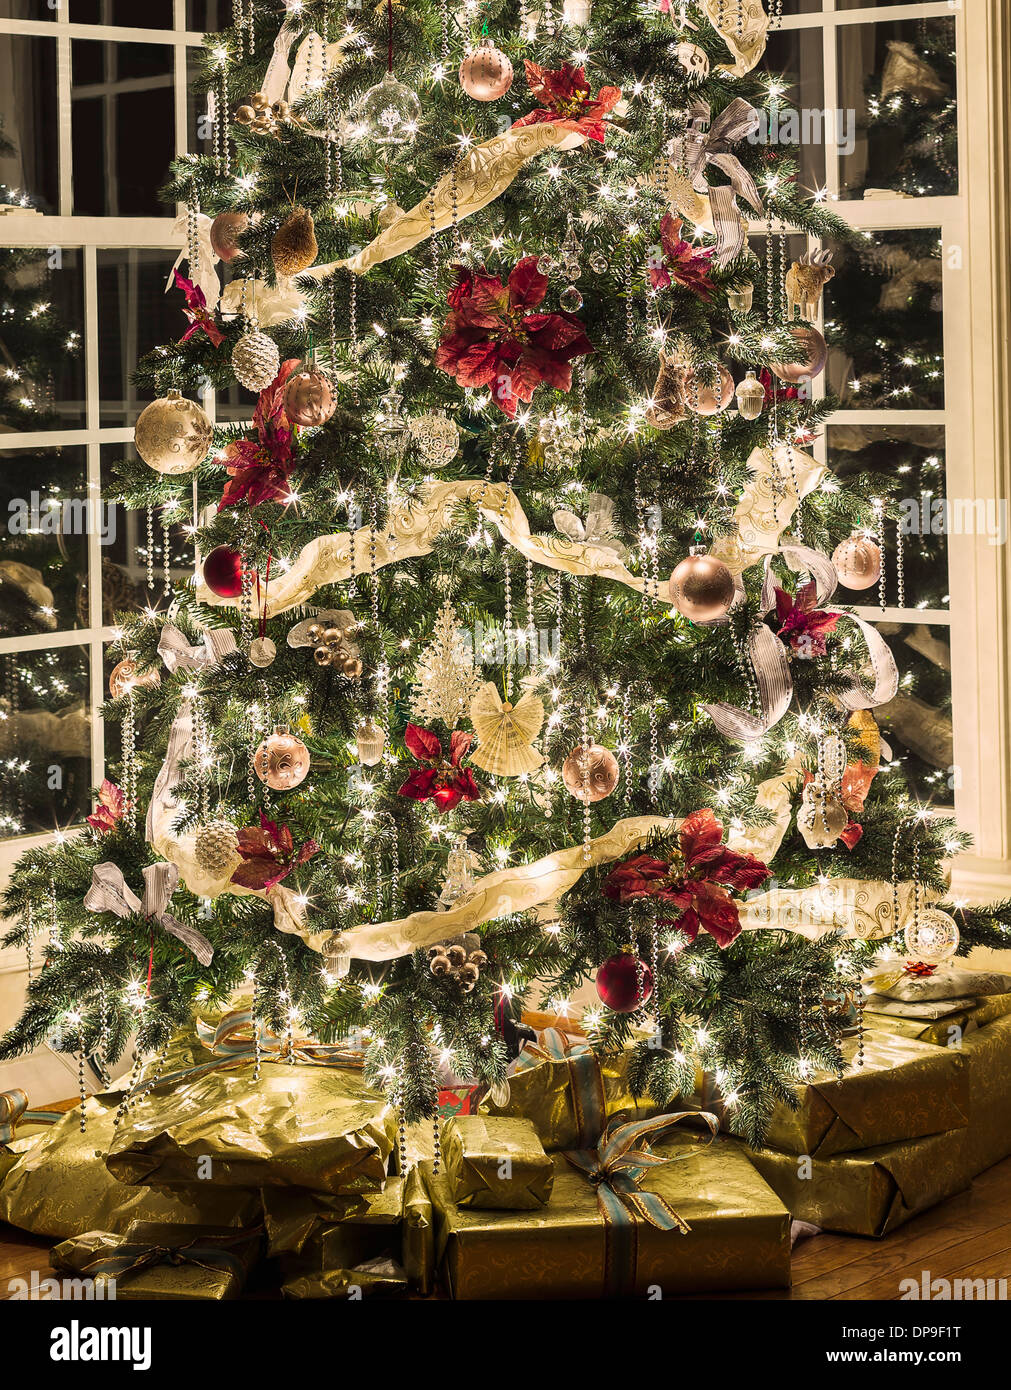 Christmas tree with lights and decorations and Christmas presents underneath in a house living room Stock Photo